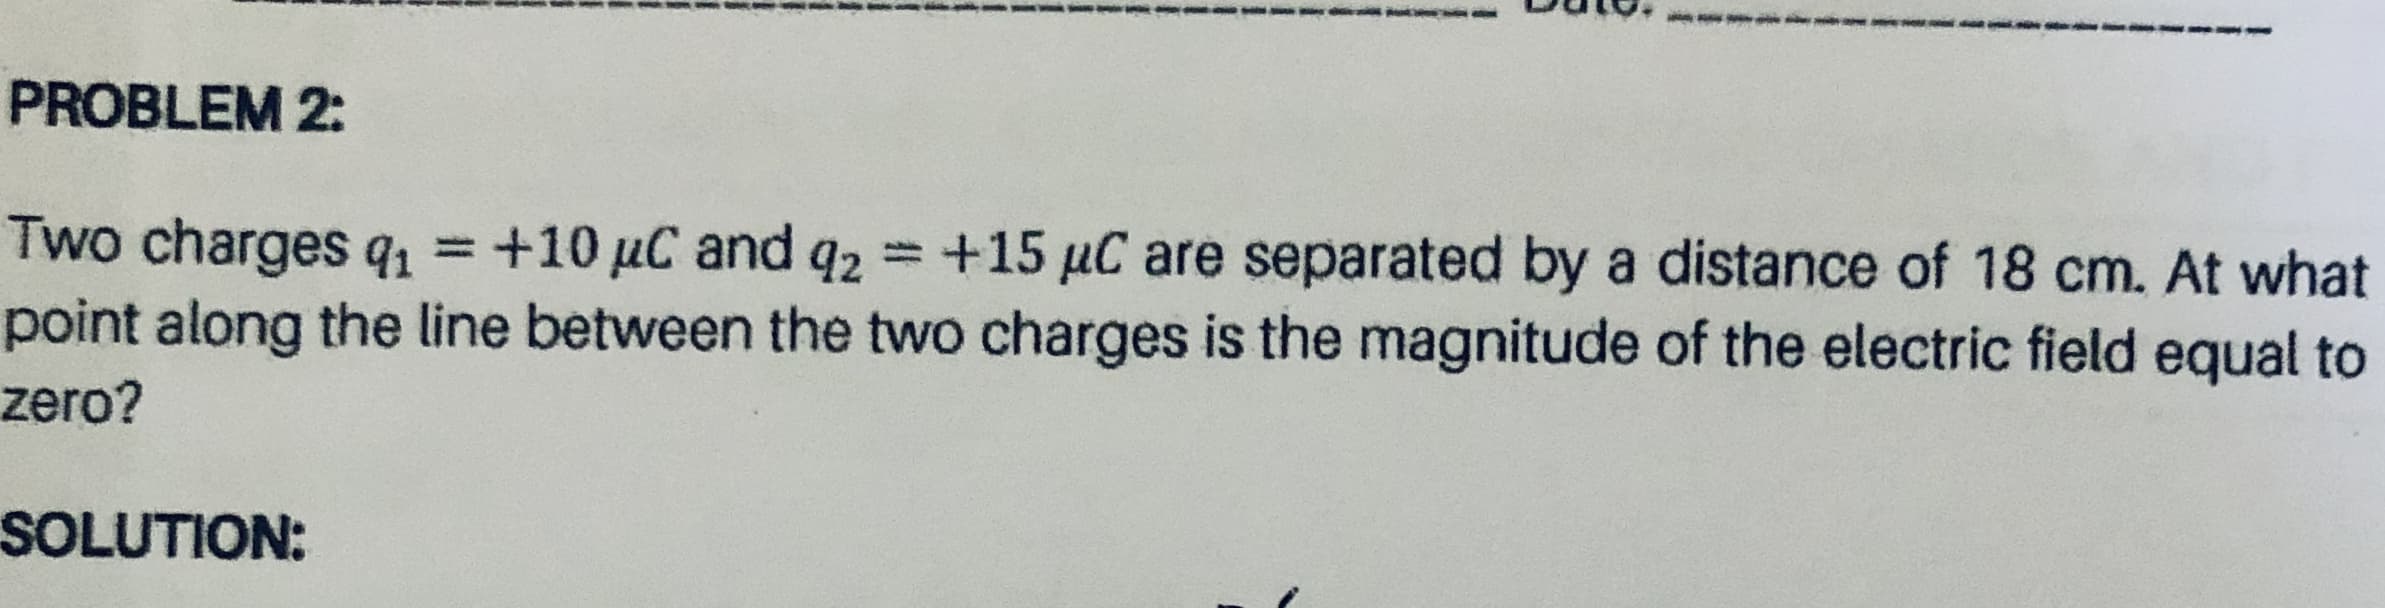 Two charges q1 =+10 µC and q2
point along the line between the two charges is the magnitude of the electric field equal to
zero?
+15 µC are separated by a distance of 18 cm. At what
